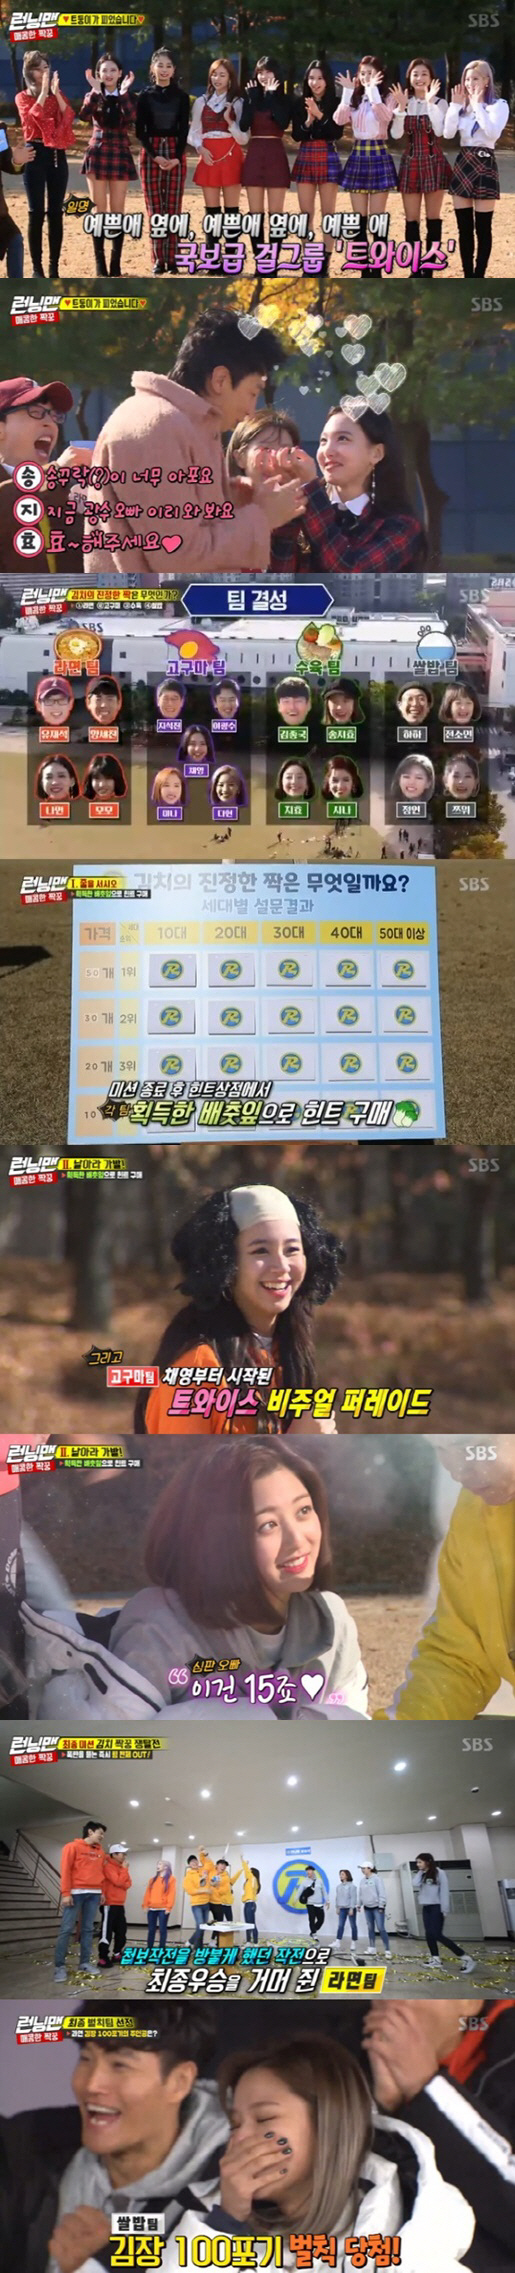 <p>Viewership survey Agency Nielsen Korea, according to the last 2 days of the broadcast of ‘Running Man’is the main advertising officials of the important indicators here are age 20-49 years (‘2049’) target audience 4. 5%(NCR, furniture, Part 2 viewership standard)record for the same time period, 1 ranked. Average viewership is part 1 of 5. 3%, Part 2 7. 7%(the NCR furniture viewership standards)was, per minute, with a maximum application rate of 8. Up to 8% jumped.</p><p>The kimchis true mate, find Kim most distinctive ‘spicy paired peek-a-Boo’ lace decorated in the ‘Running Man’ sister group TWICE home and by members of the acclaimed shorter. This race is a team competition with a view as if the team is Yoo Jae-Suk, Yang and more as well, Momo, I smoke, and every team in the Suk Jin, Lee Kwang-soo, Chae, Mina, Implementation, Training, Team Kim Jong Kook, Song JI Hyo,, Hyo, Rice team in that one, small, square, Richardson sub divided into.</p><p>Each team has a ‘line’ through the game fierce confrontation unfolded, the team, the academic team, and each team, each 1 win by handing out the hints acquired, and Round 2 of the ‘fly! The wig-switching in the potato team and if the team is 1 for, 2 for to or once the hint is acquired.</p><p>The last final round that the menu is attached to the name tag off of the menu when you exchange, while a bomb attached to the name tags off team the power is out, and the menu until the opponent beyond the ‘Star race’began. Ago min is Lee Kwang-soos name tag off, but Lee Kwang-soo is a bomb, this Rice team is the power being out face. Water and water our father, and our exchange in La, teams info to start up, expand, and ‘kimchis true even’exclaim the headquarters seat and headed towards, training, team support available to the team or the name of the tag off as when I smoke “then”and cry victory.</p><p>Meanwhile, Kim 100 give Driving Cycle penalty for the uncle in the game Rice team of the square ‘shit son’, born and penalties in winning was and this scene is up to 8. 8%jump in the ‘best 1 minute’.</p>